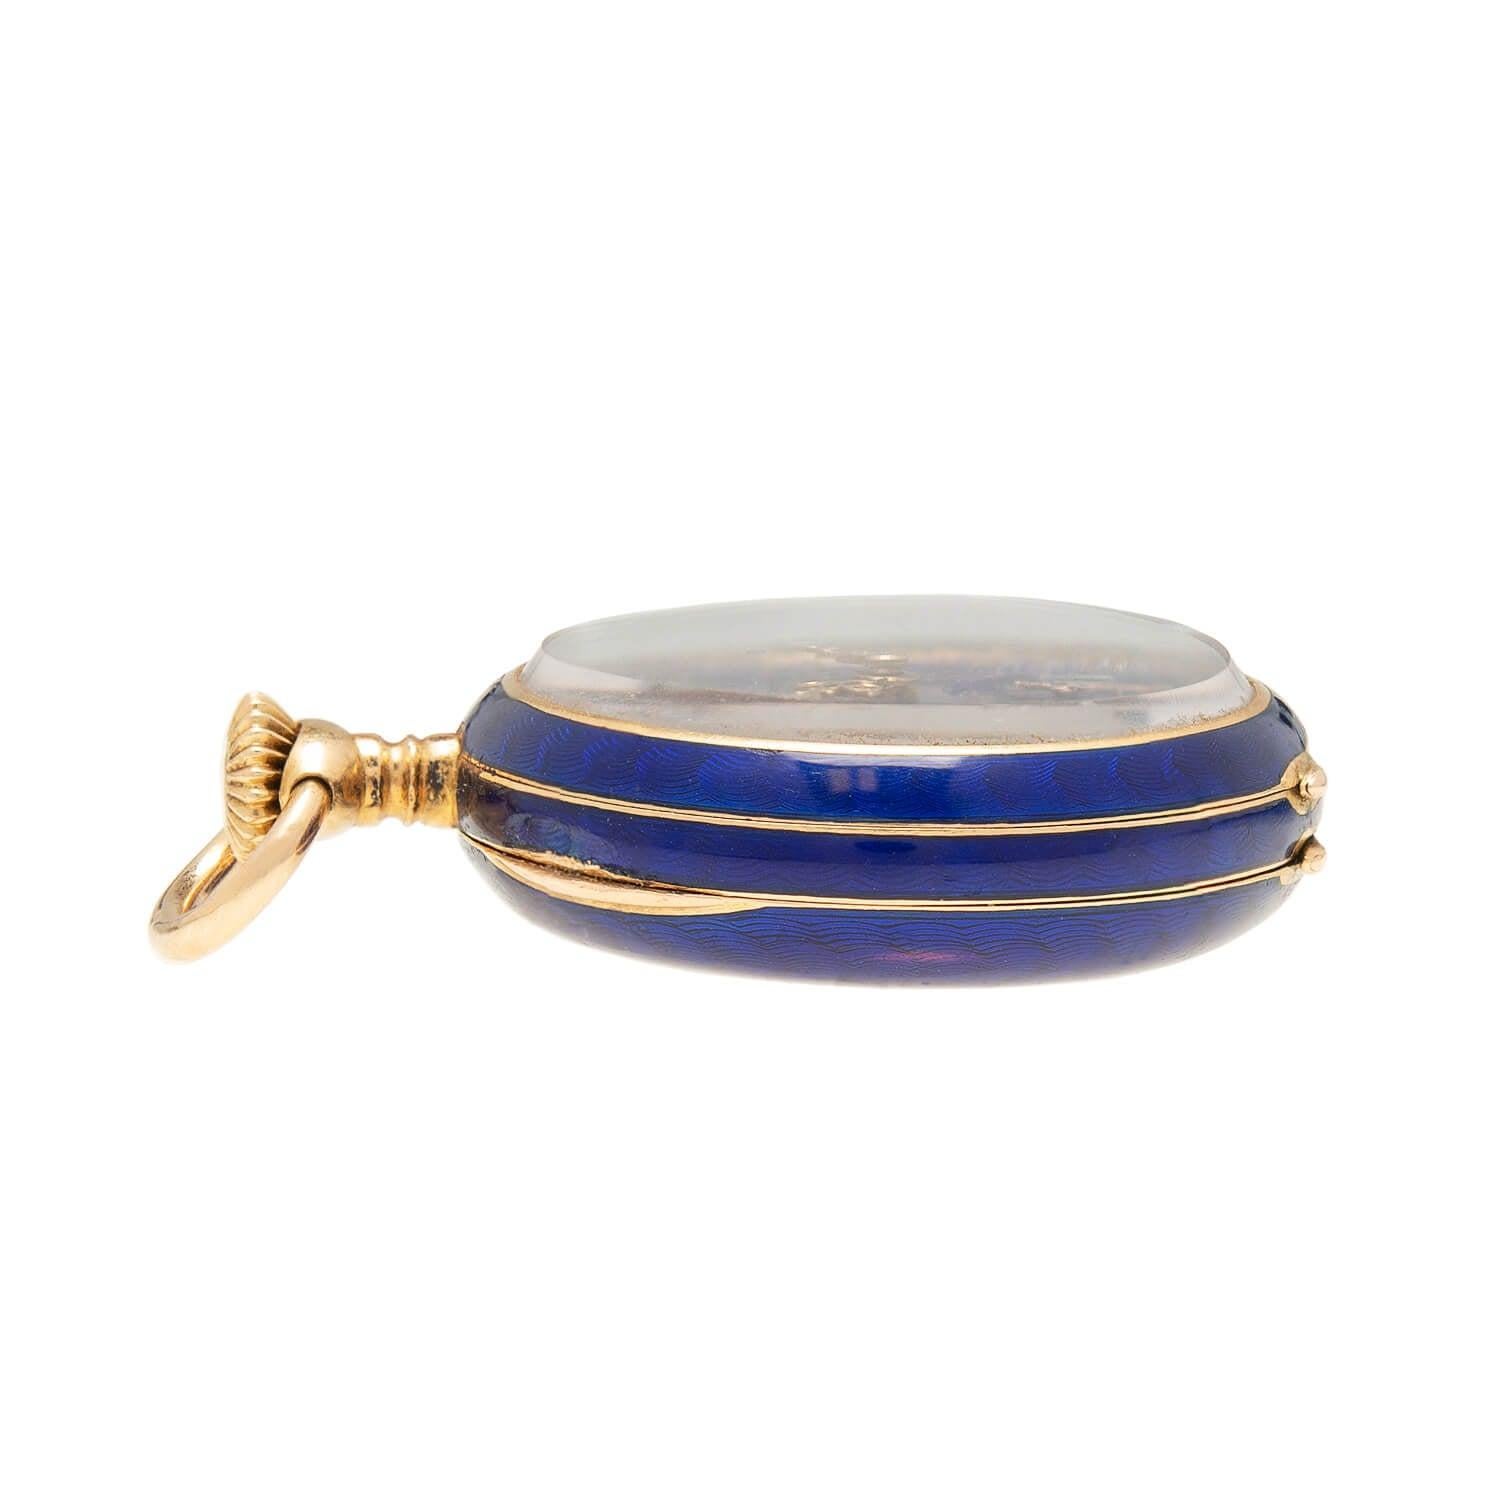 A gorgeous pocket watch by Patek & Co. from the Late Victorian (ca1890s) era! Crafted in 18k yellow gold, this stunning piece has a striking blue swriling guilloche enamel pattern. This well-made timepiece features an applied 18k gold fleur-de-lis